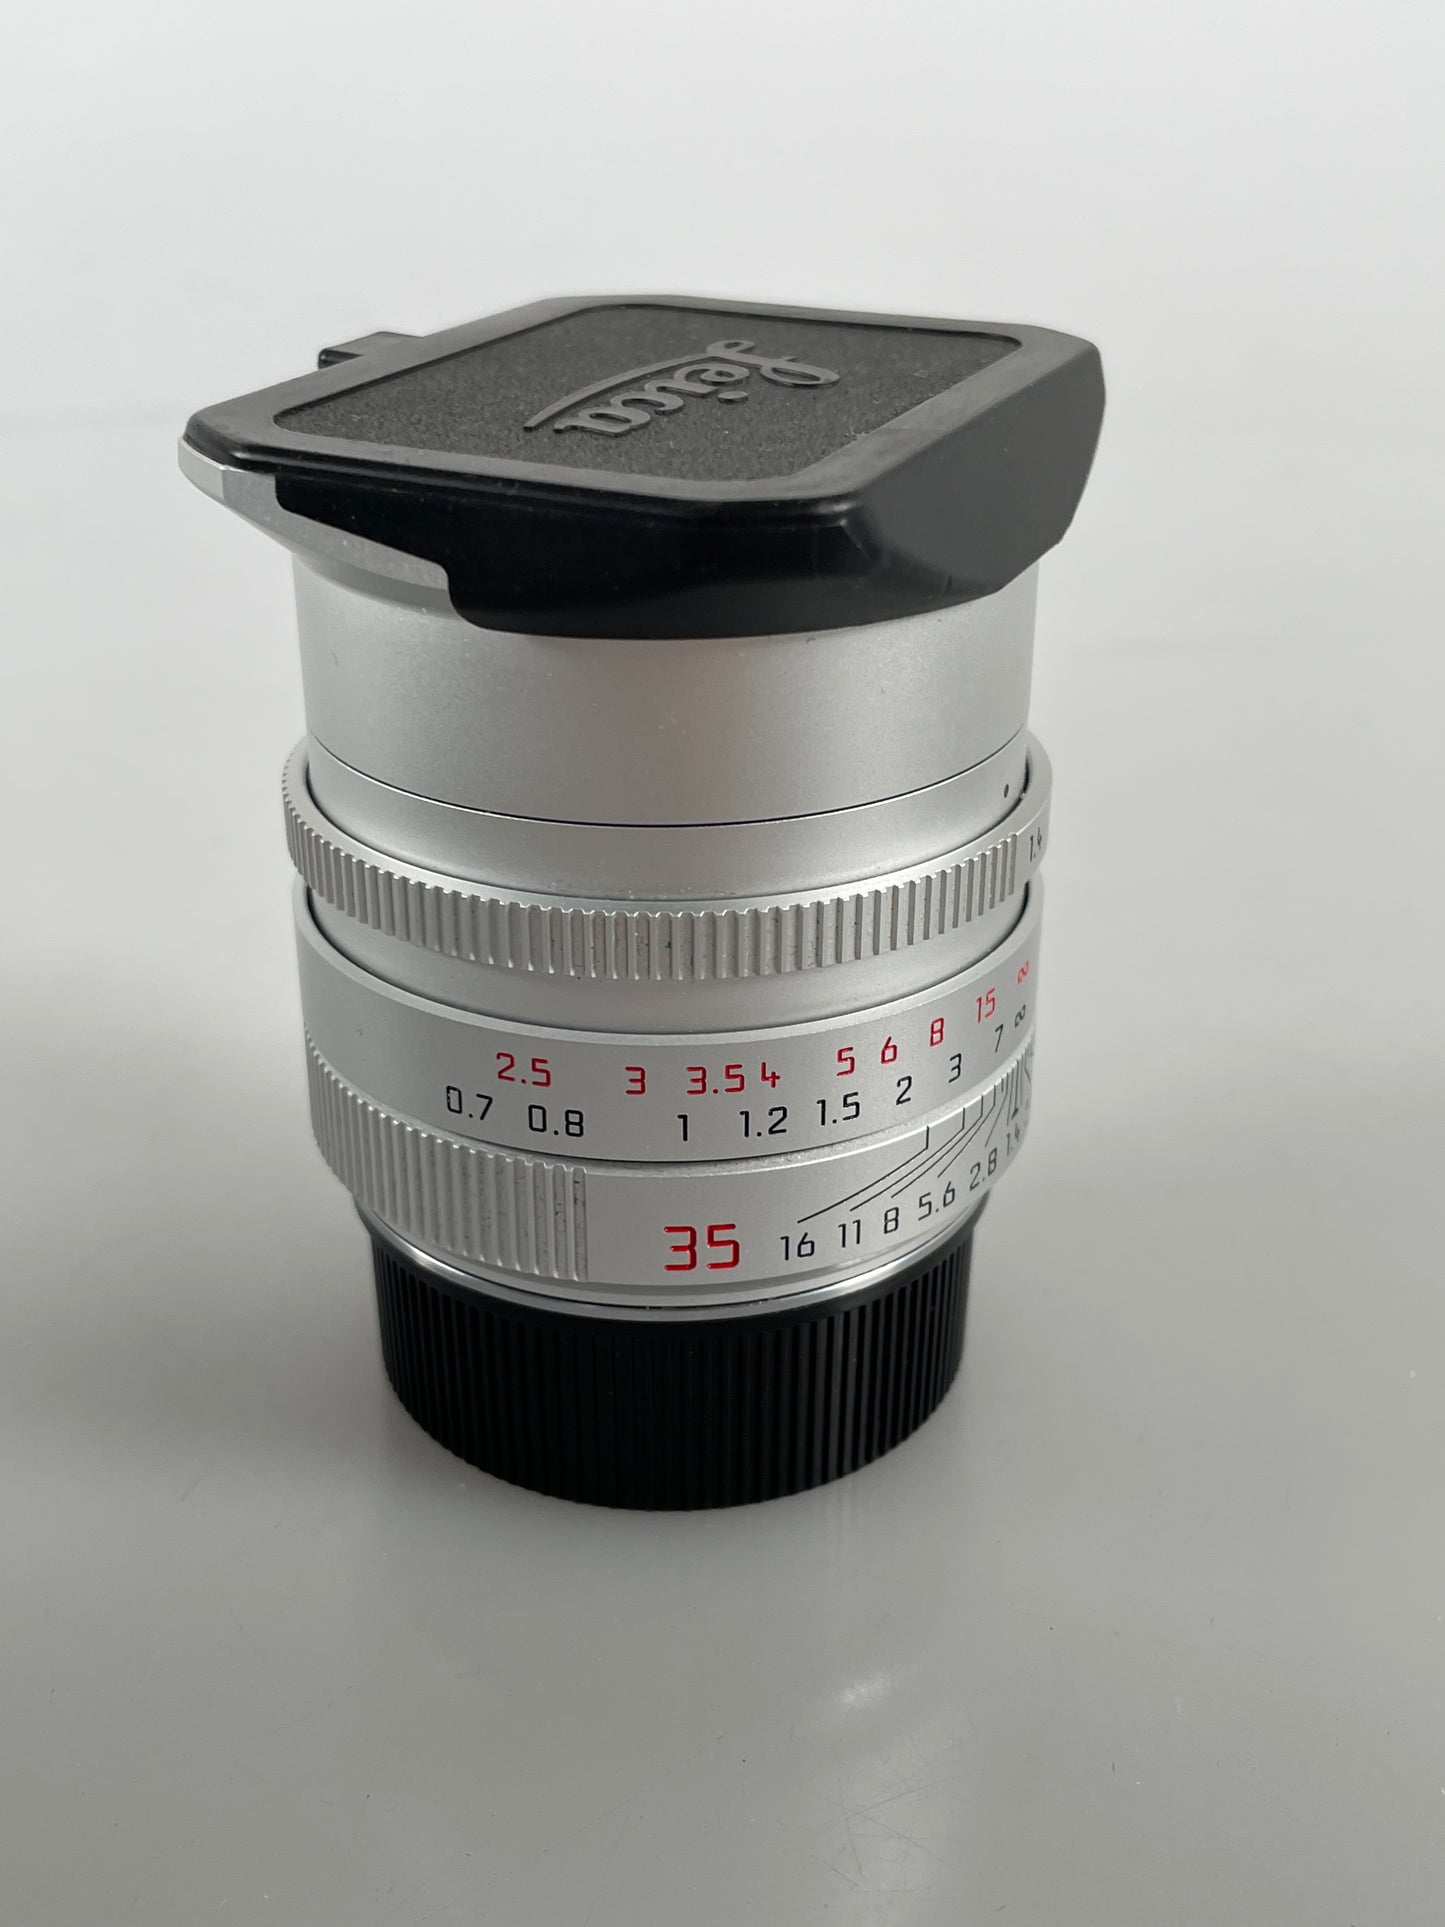 Leica 35mm f1.4 Summilux-M ASPH FLE Chrome with hood and caps